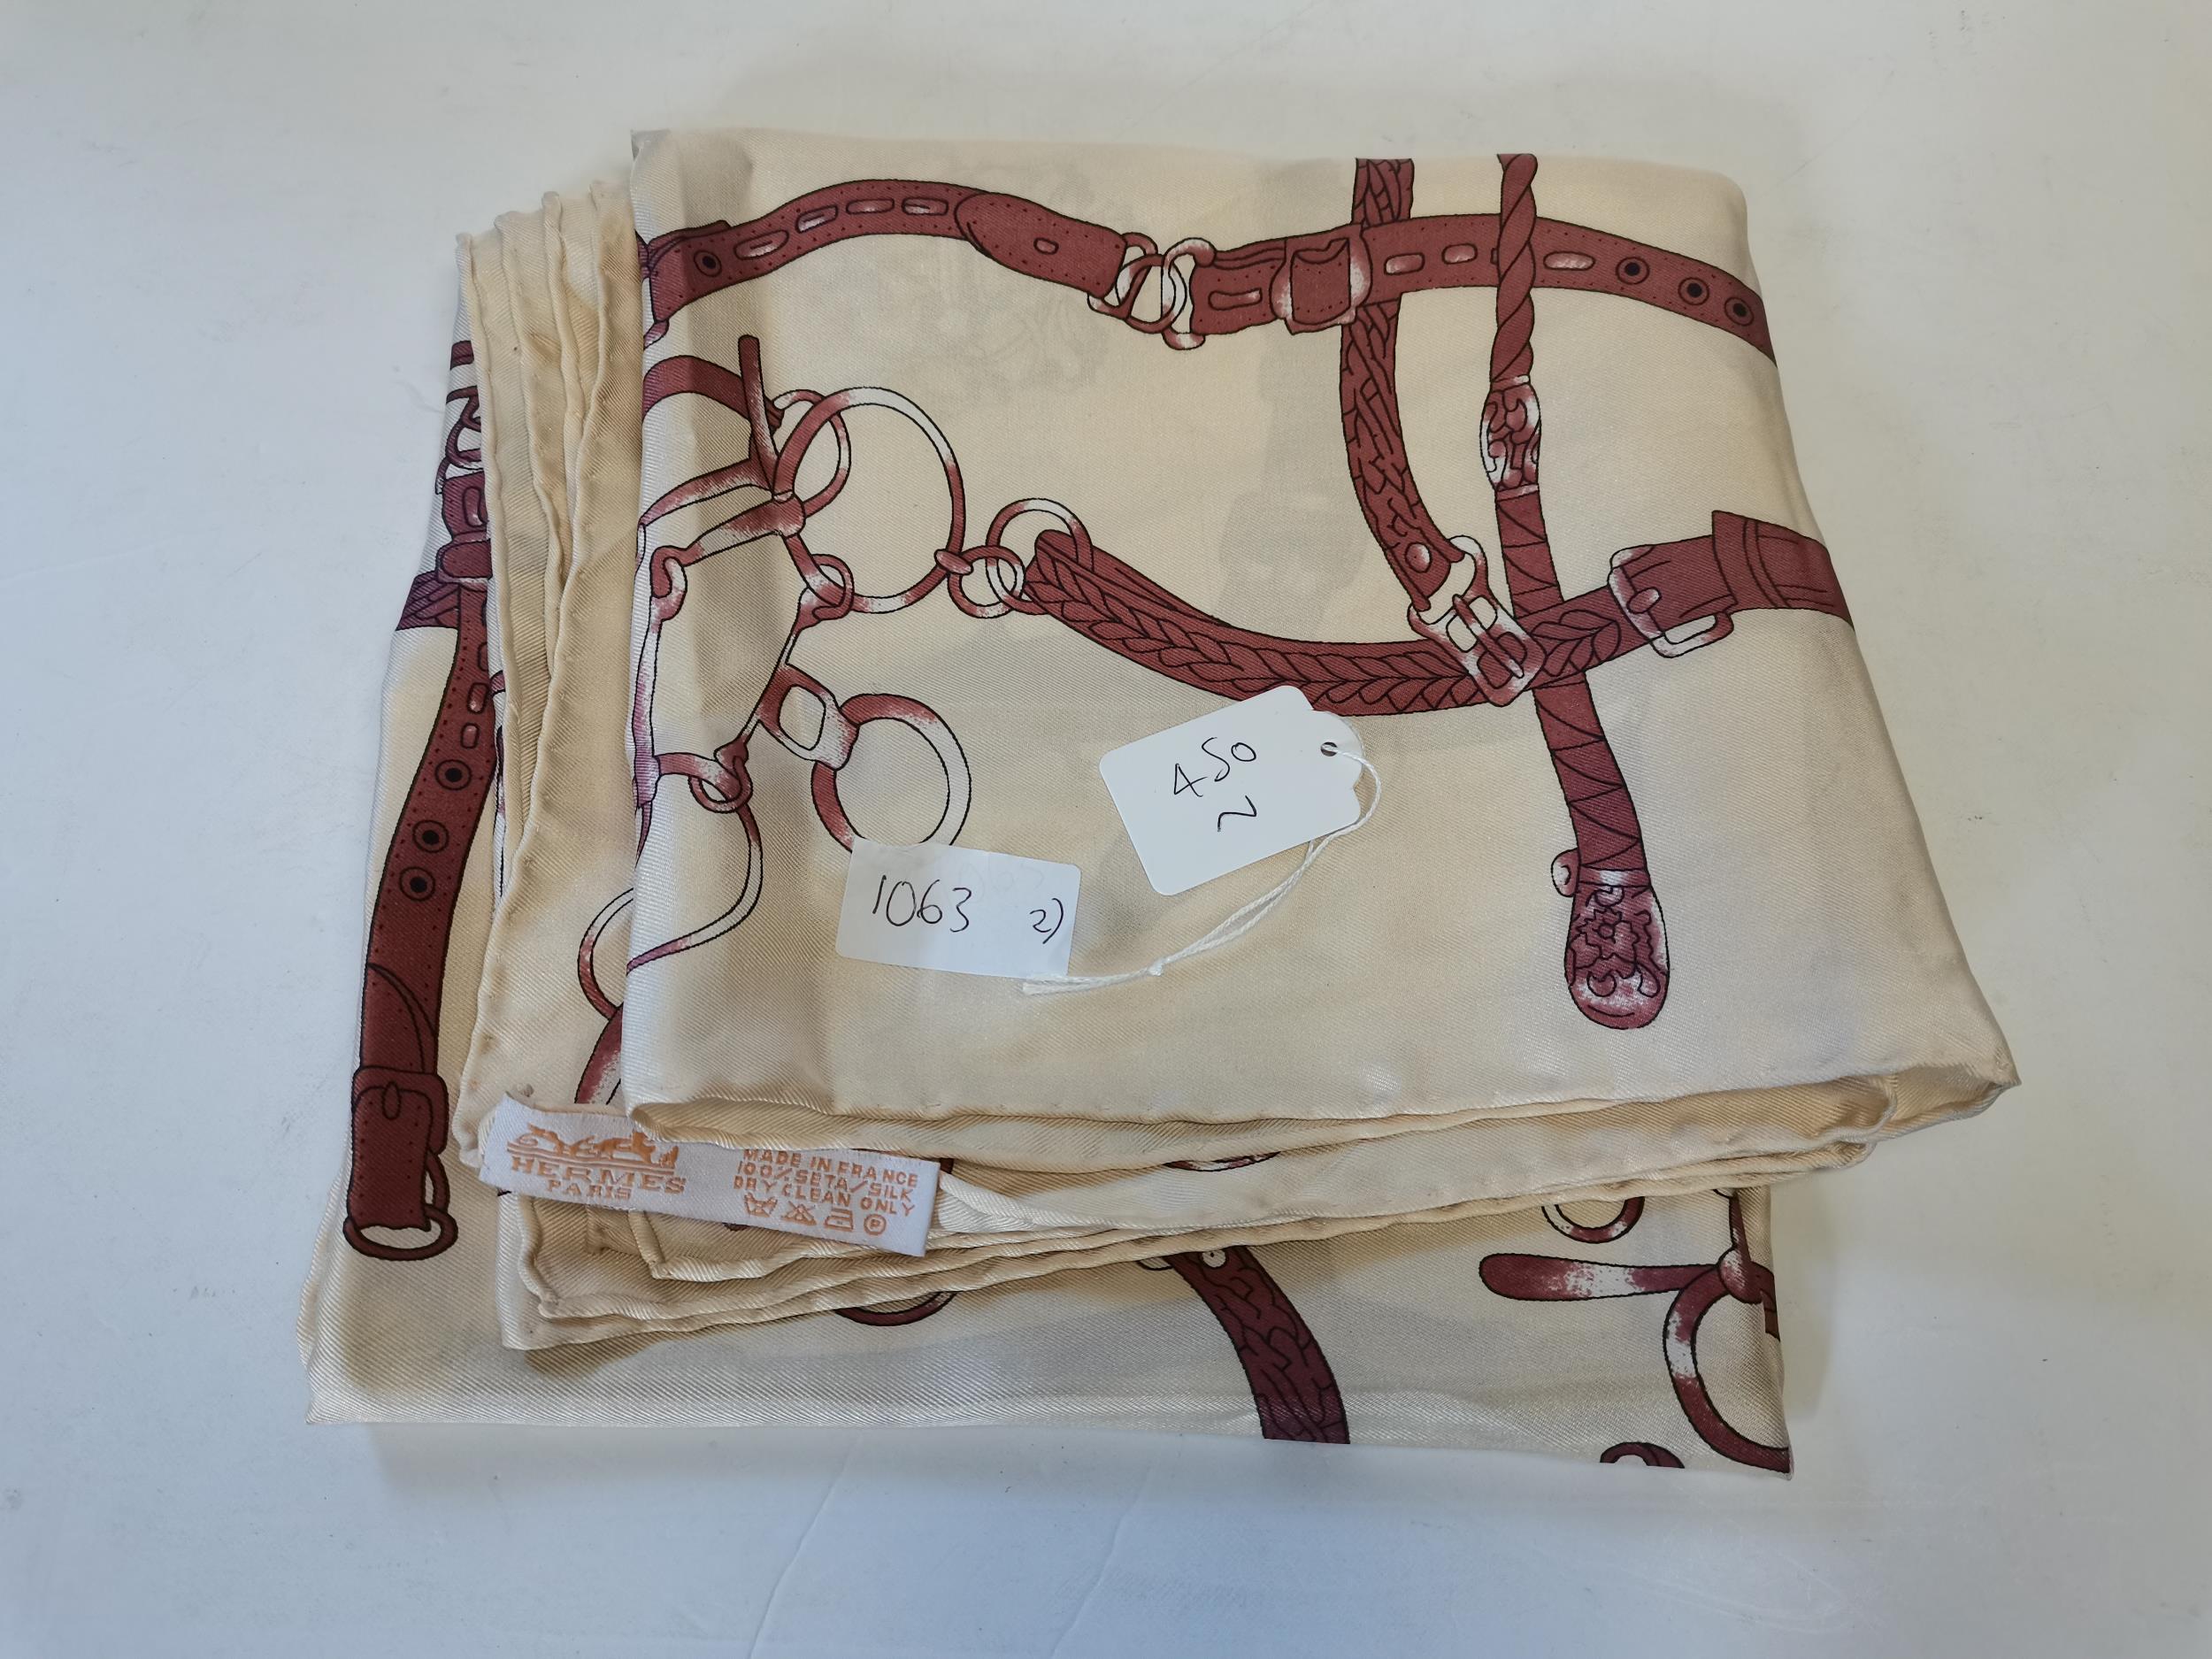 Genuine Hermes silk scarf, cream and brown with hand rolled hems. 33" x 33". Good vintage condition - Image 2 of 4